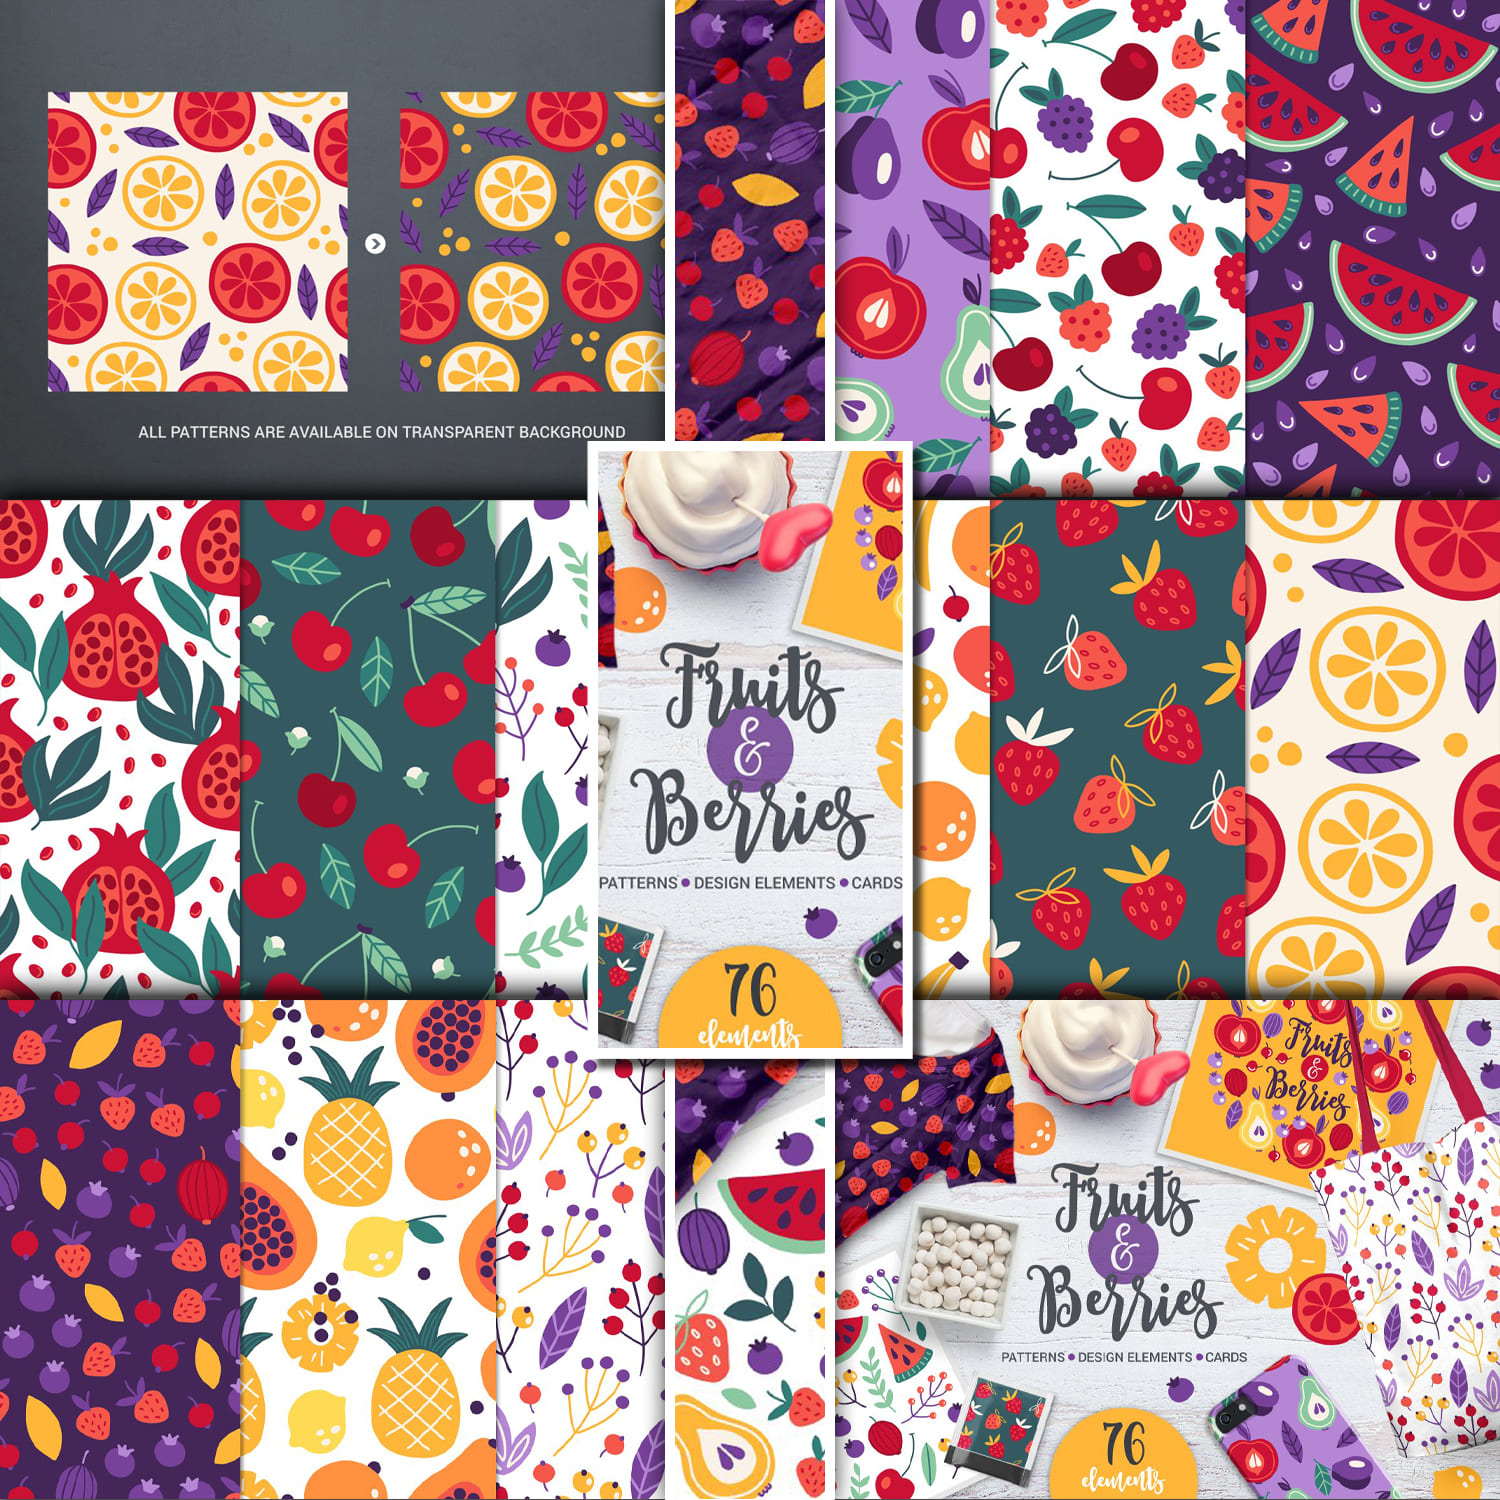 Lots of fruit and berry patterns.